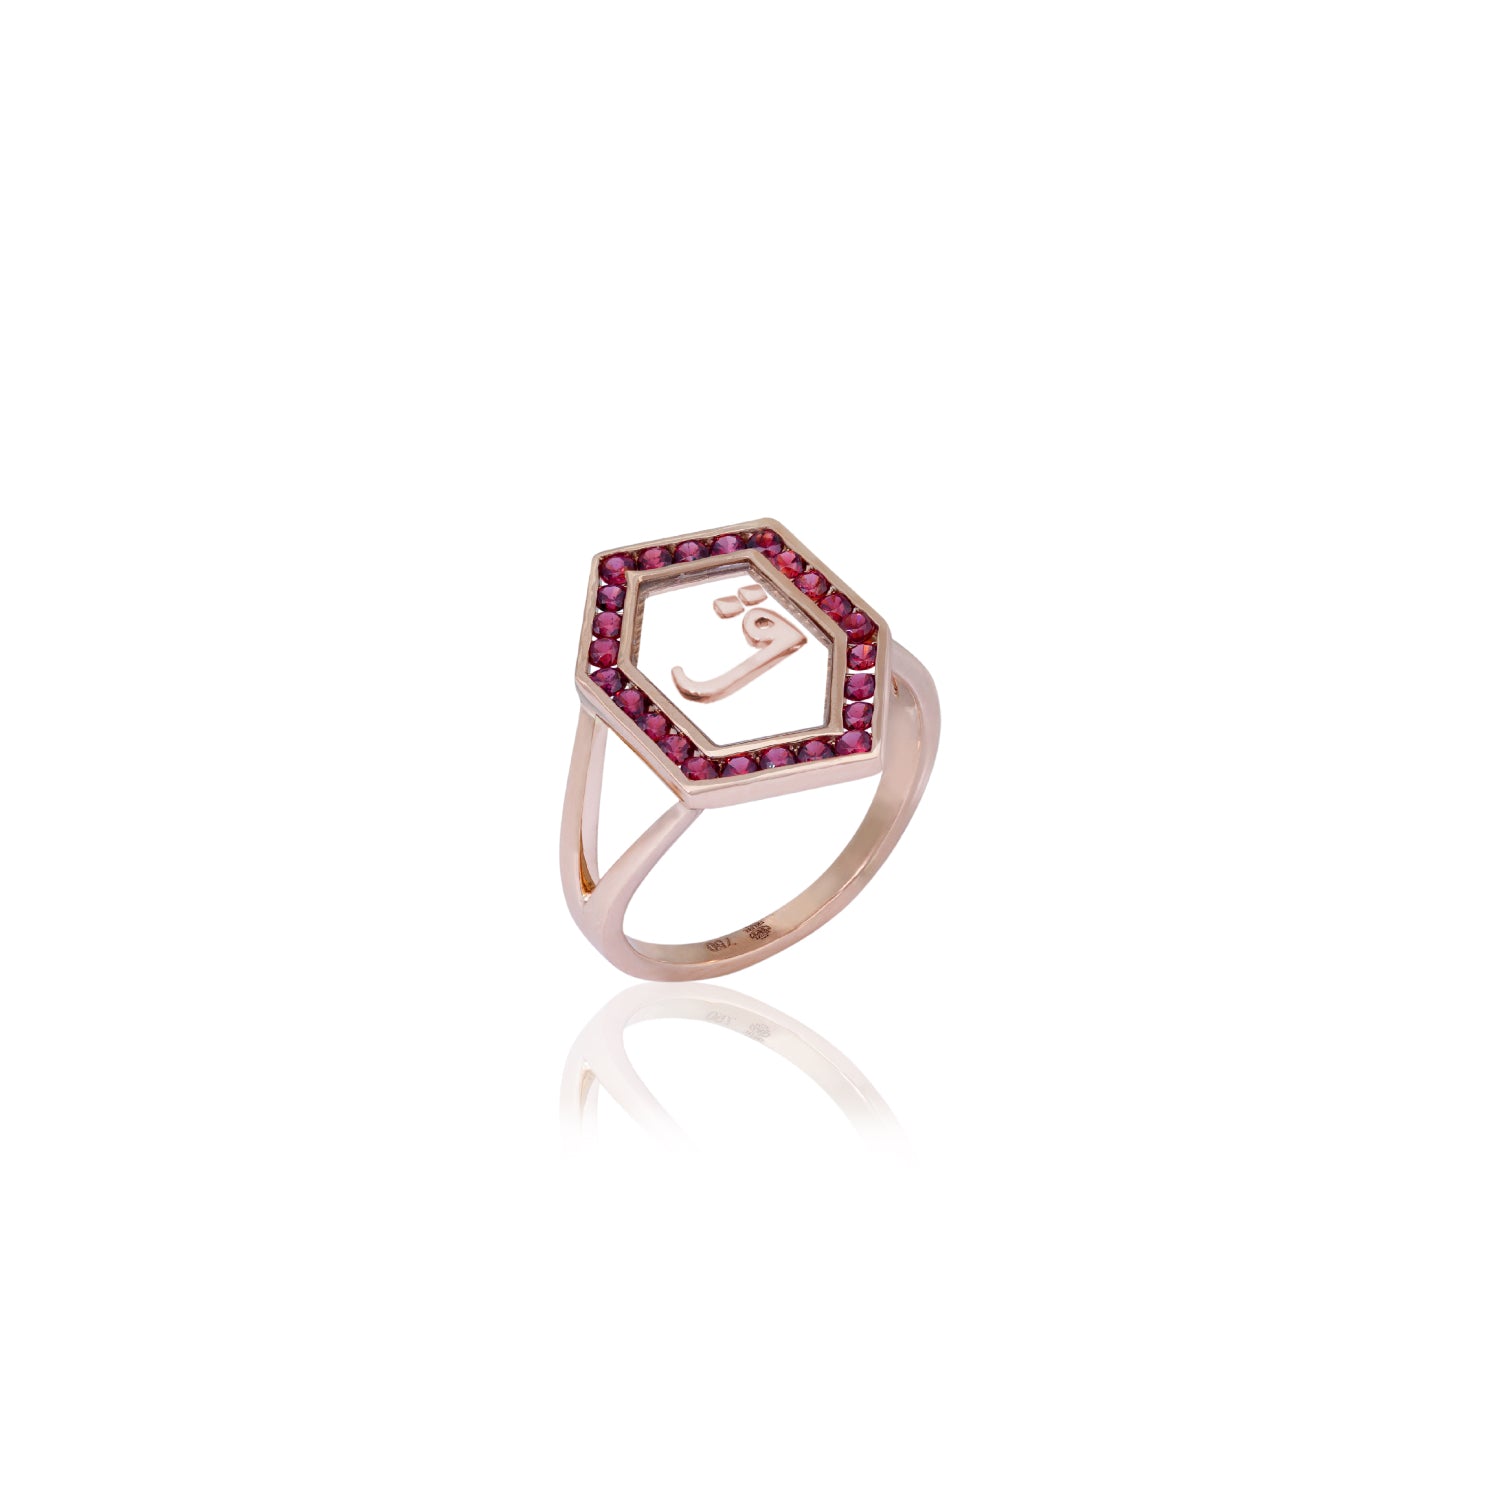 Qamoos 1.0 Letter ق Ruby Ring in Rose Gold